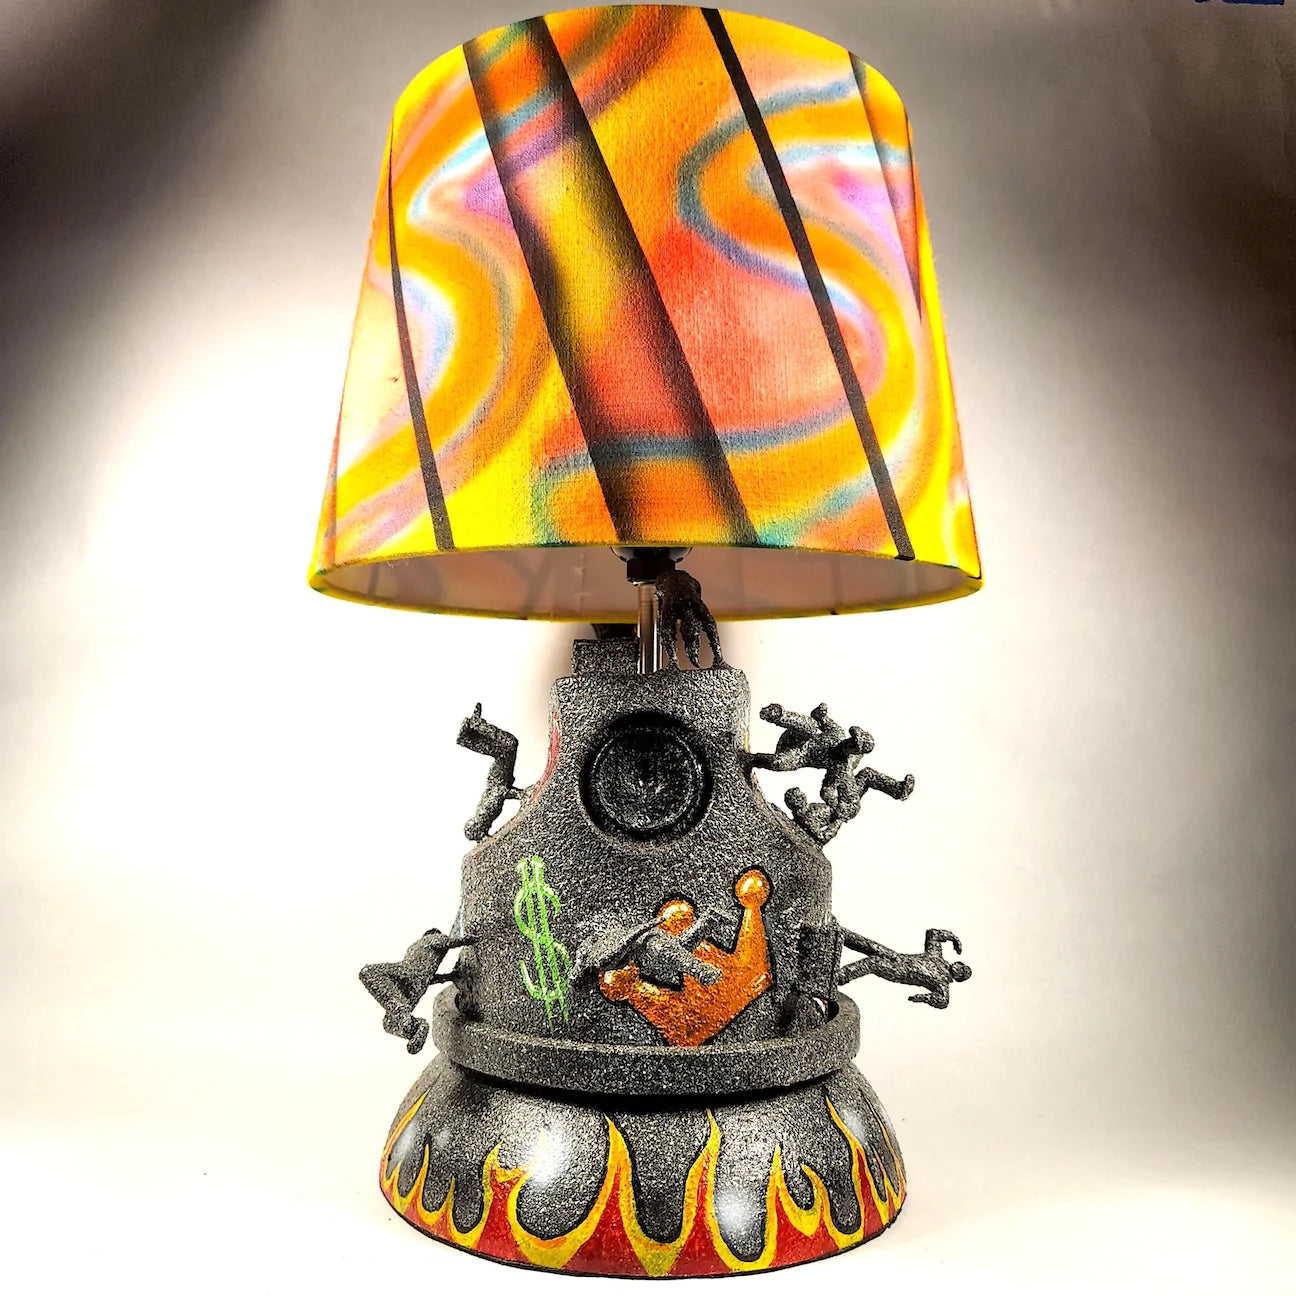 Break Street - The Lamp custom by Forces of Dorkness Available Now